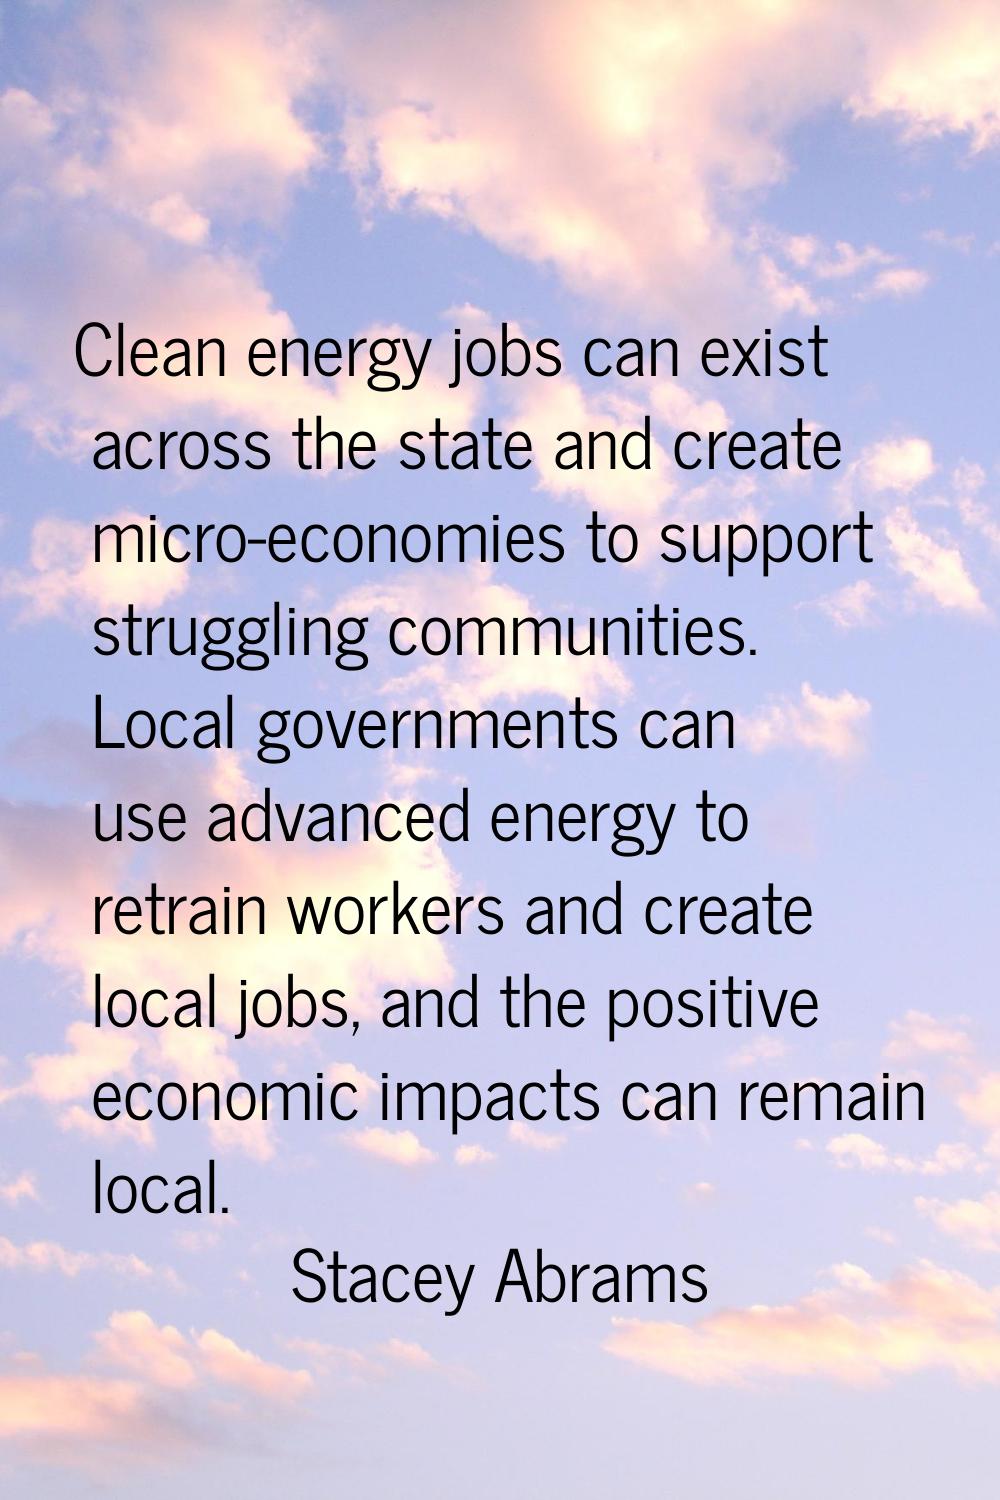 Clean energy jobs can exist across the state and create micro-economies to support struggling commu